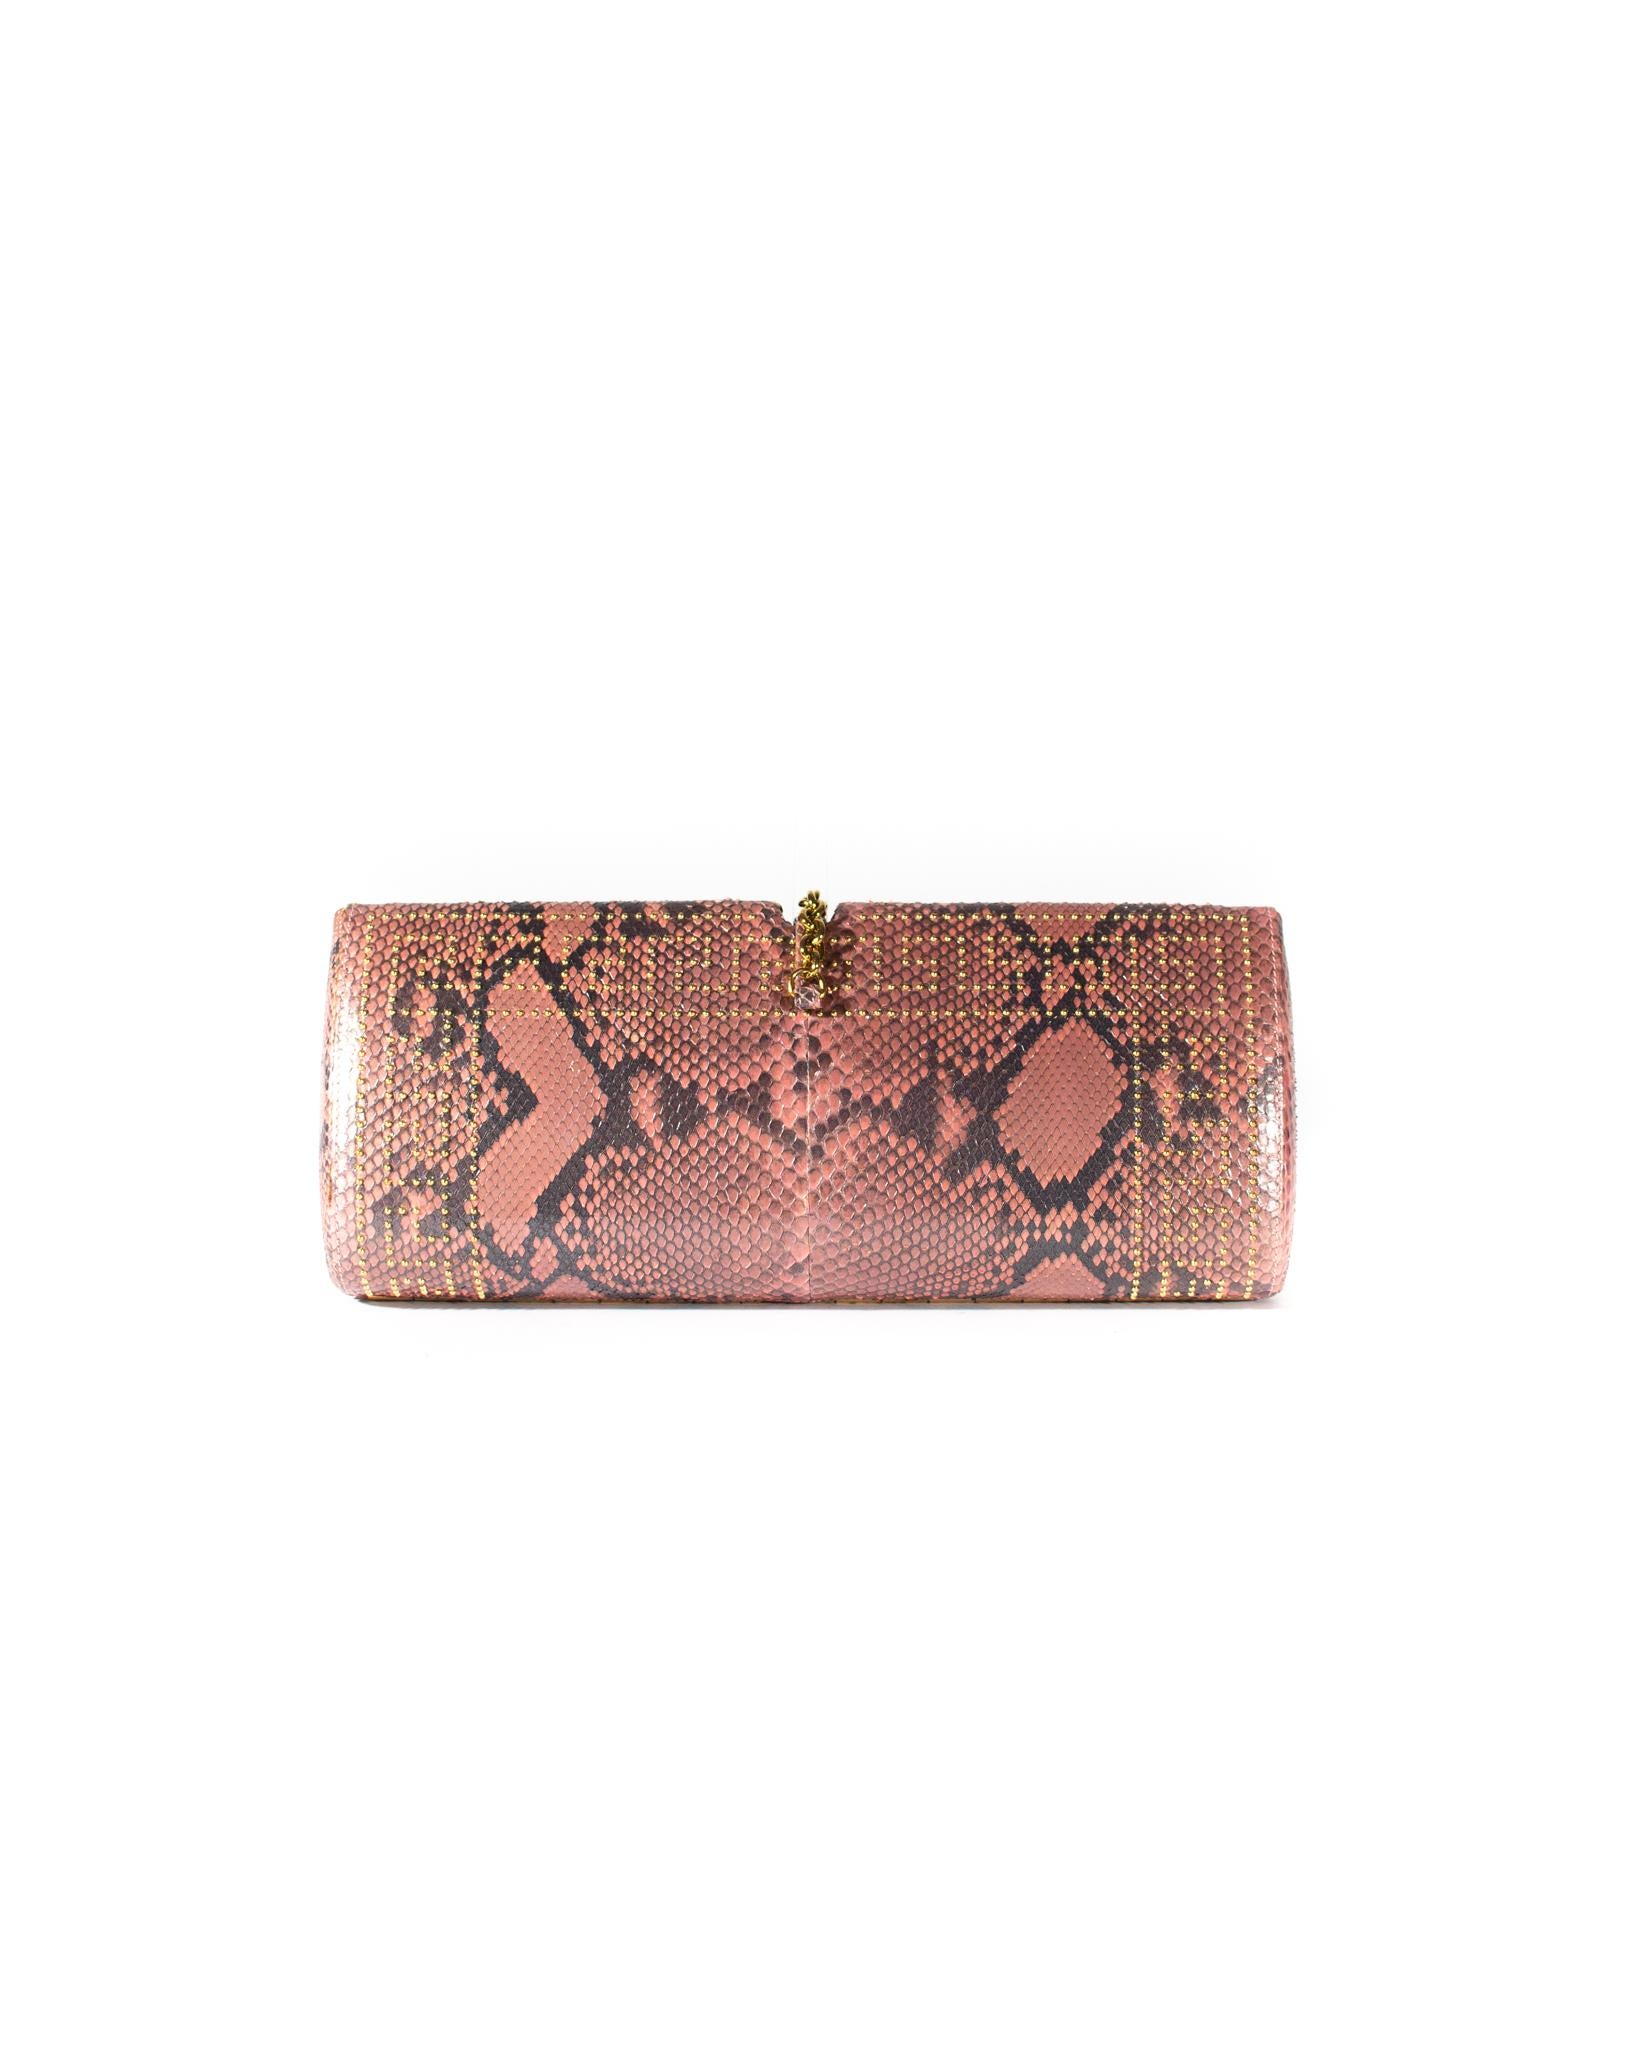 S/S 2000 Gianni Versace Python Pink Convertible Evening Bag & Clutch Donatella For Sale 1